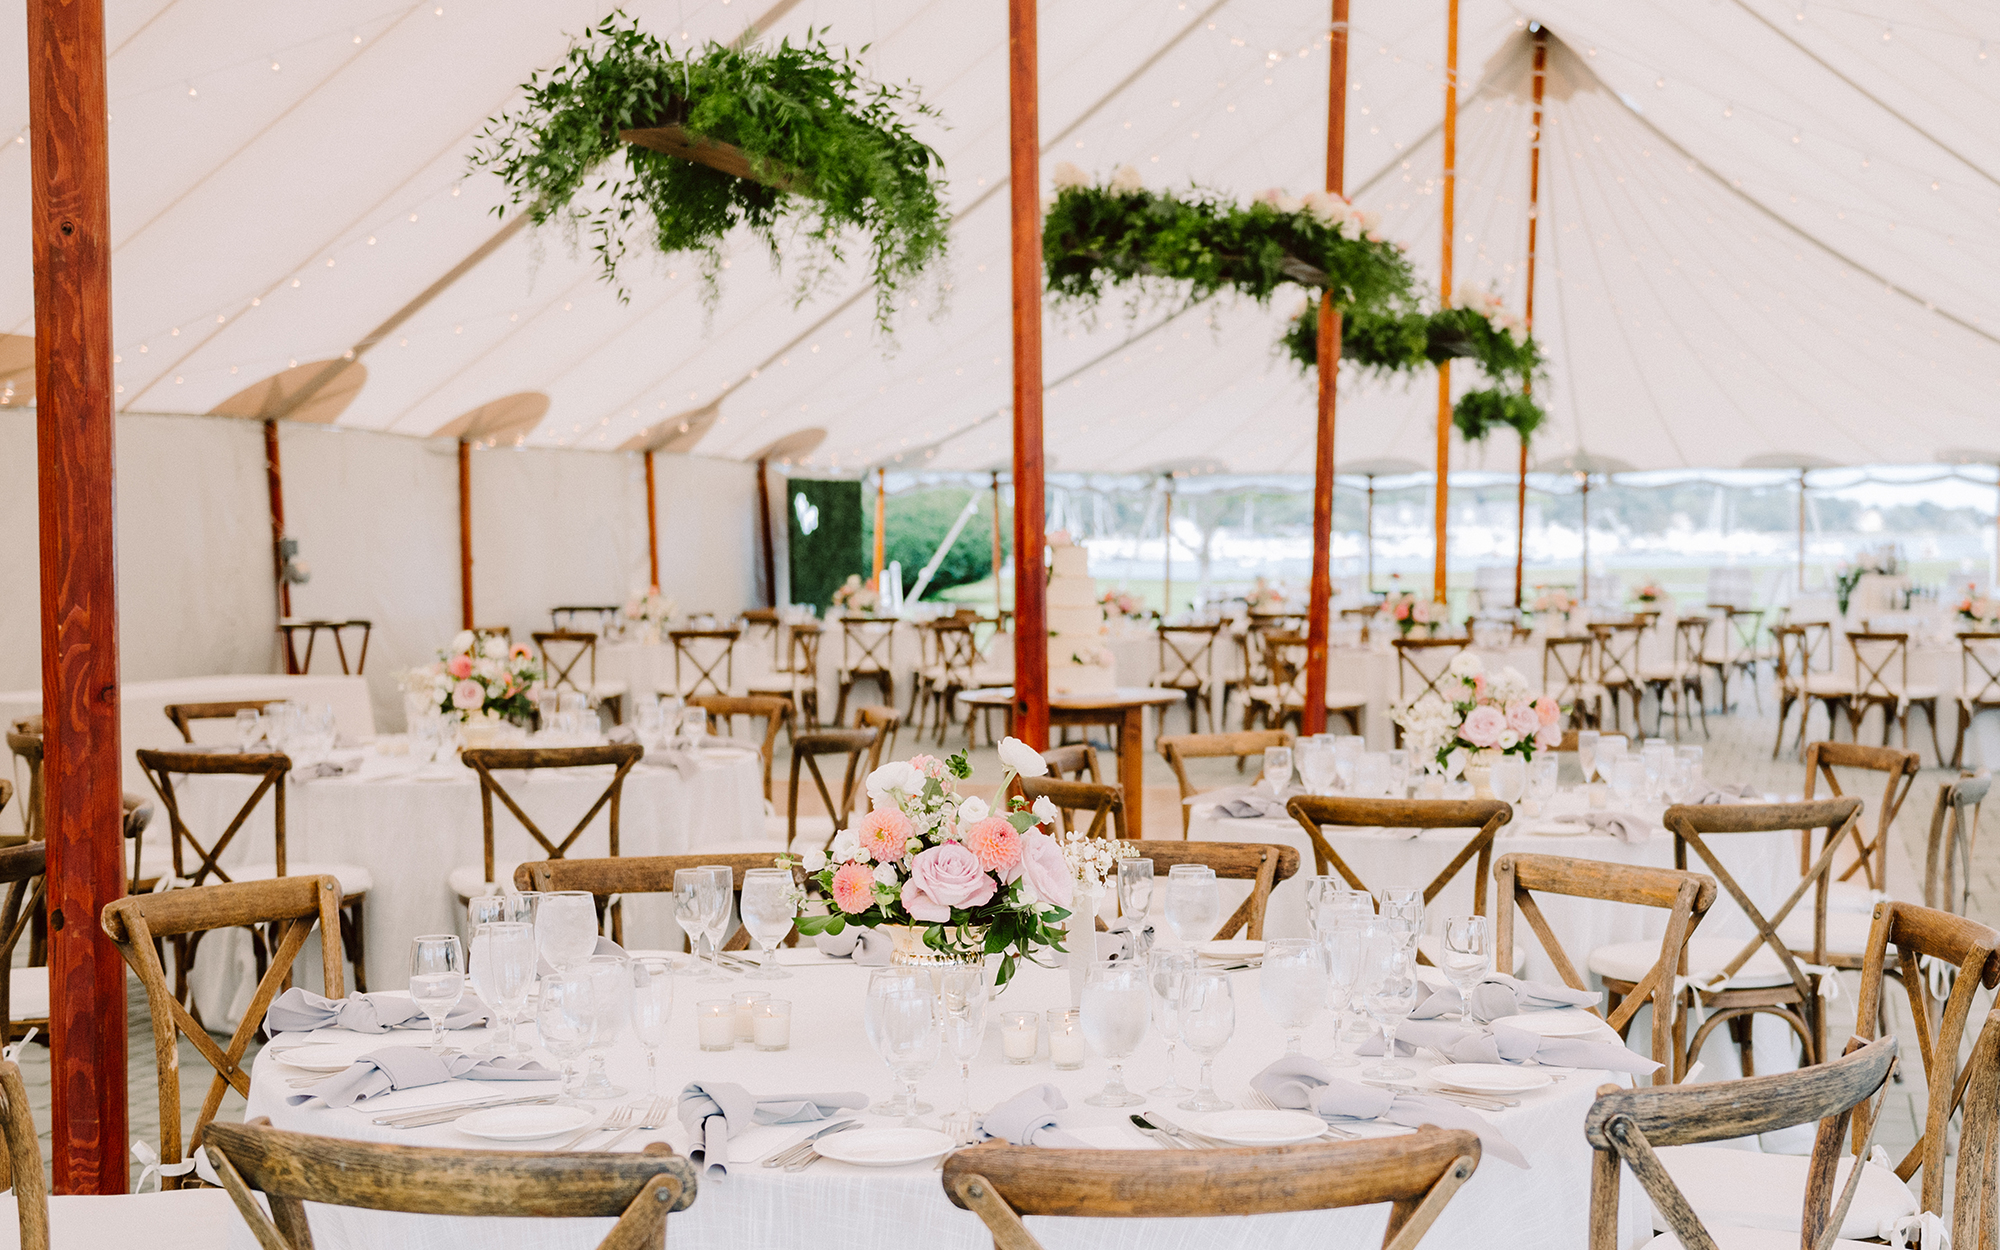 Wedding table settings beneath large outdoor tent